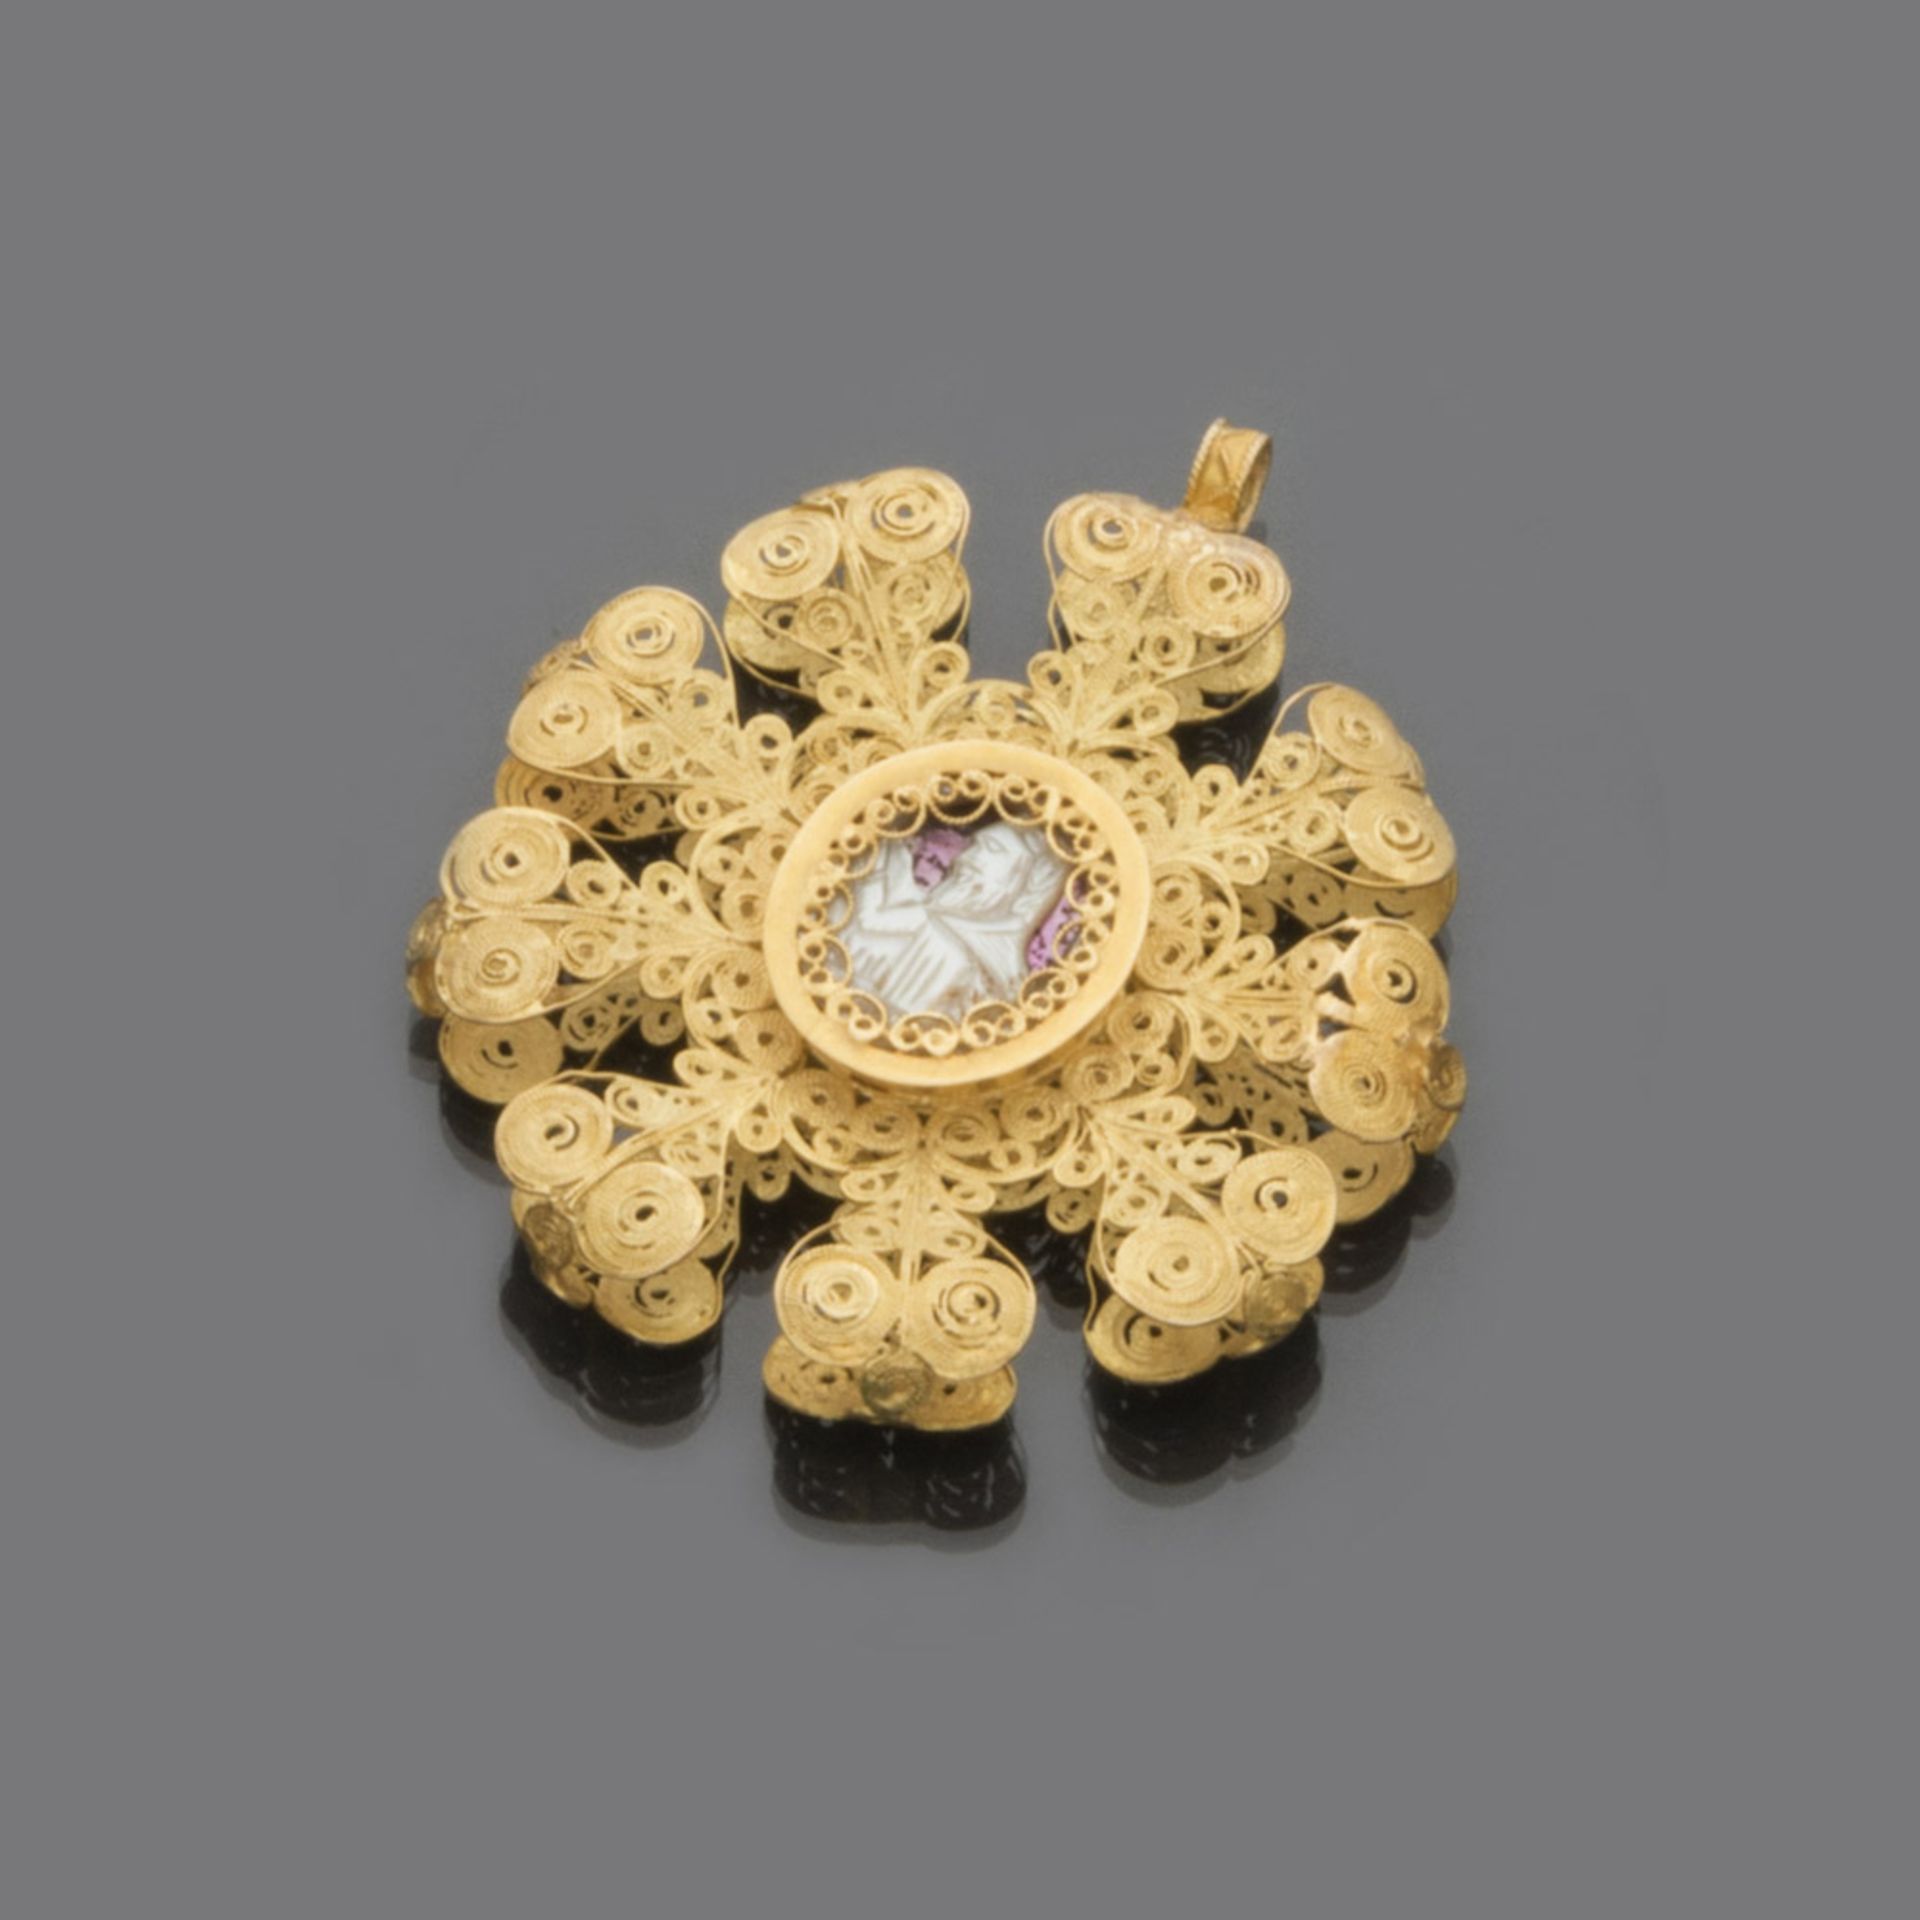 PENDANT in yellow gold 18 kts. filigree workmanship and finishes in mother-of-pearl representing